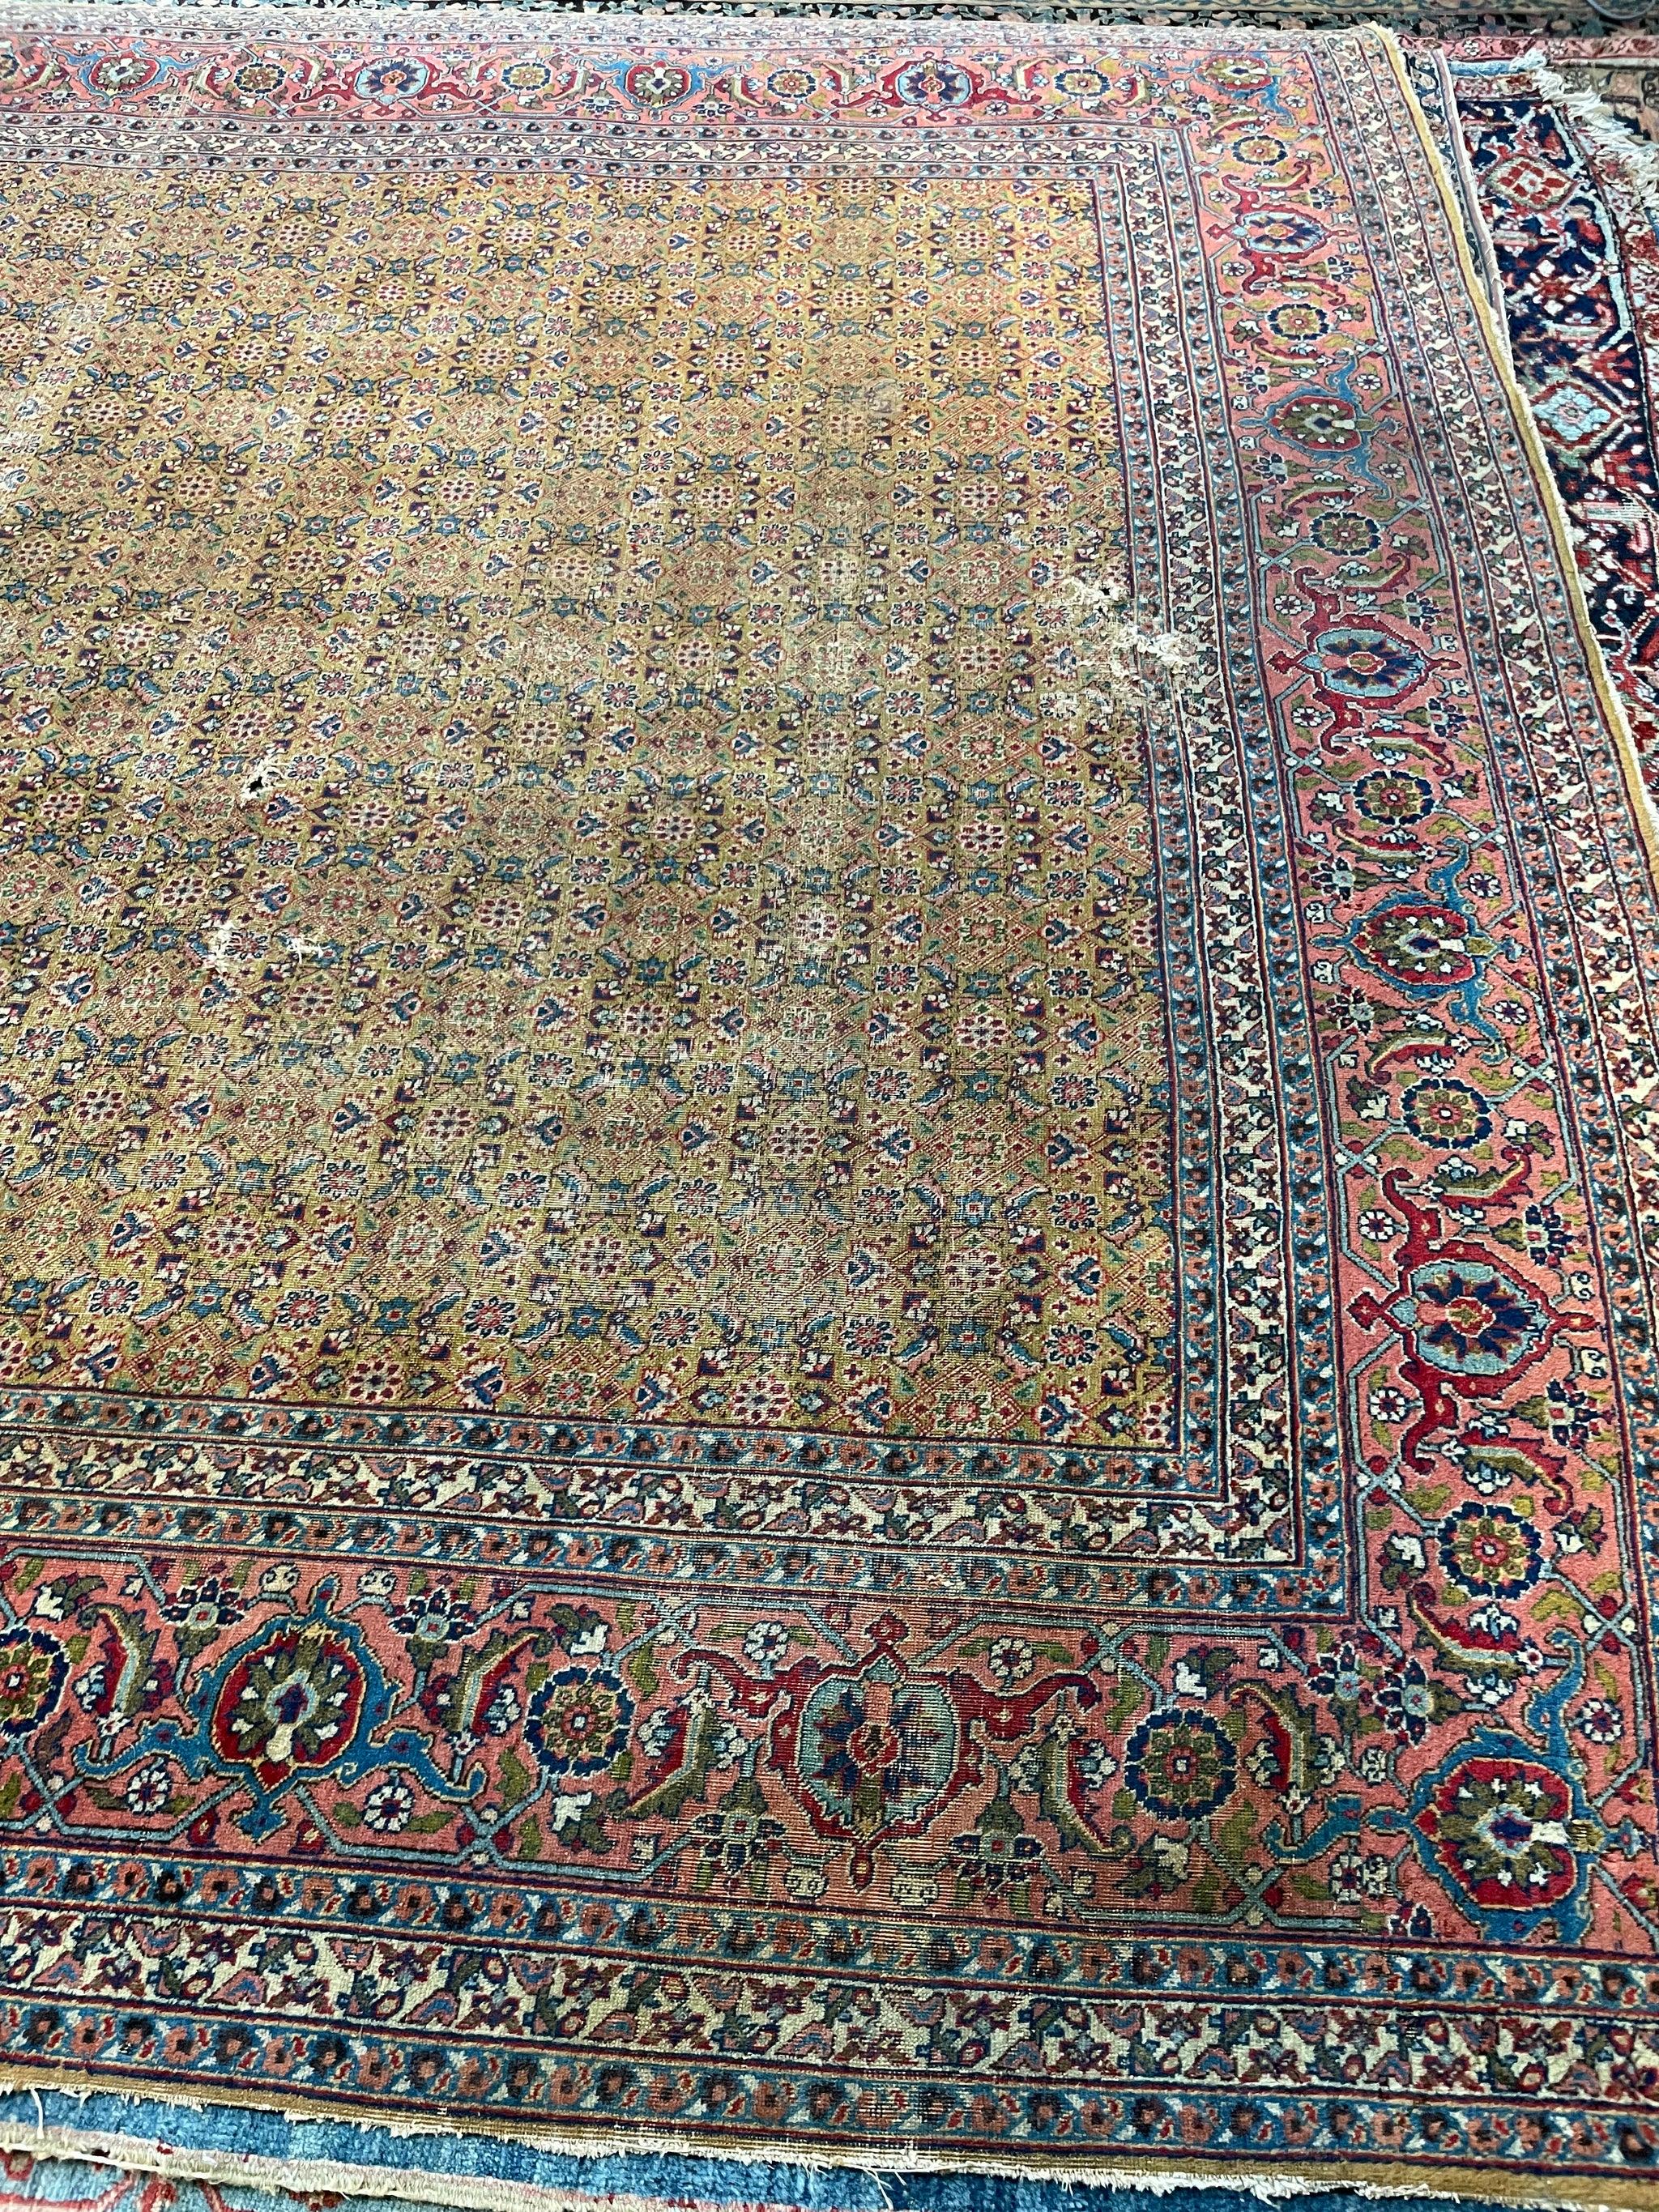 Mustard Saffron & Salmon Designer Antique Tabriz in Herati Design

About: Spectacular designer piece.

Size: 9.3. x 12.3
Age: Antique C. 1930's
Pile: Low/Medium with nice age-related patina, some worn areas, and this piece is getting restored in the